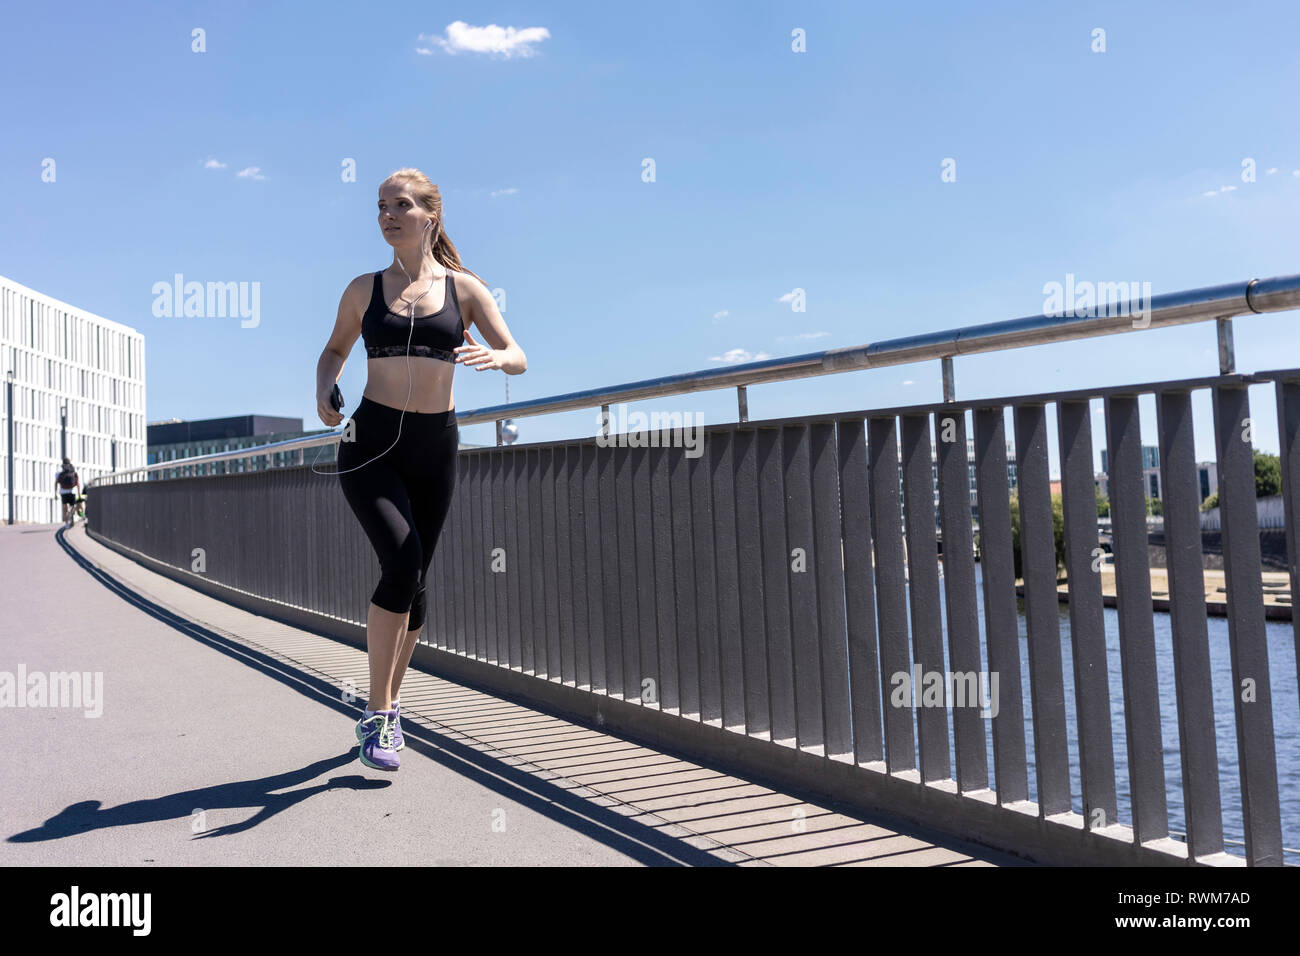 Young woman running in city, Berlin, Germany Stock Photo